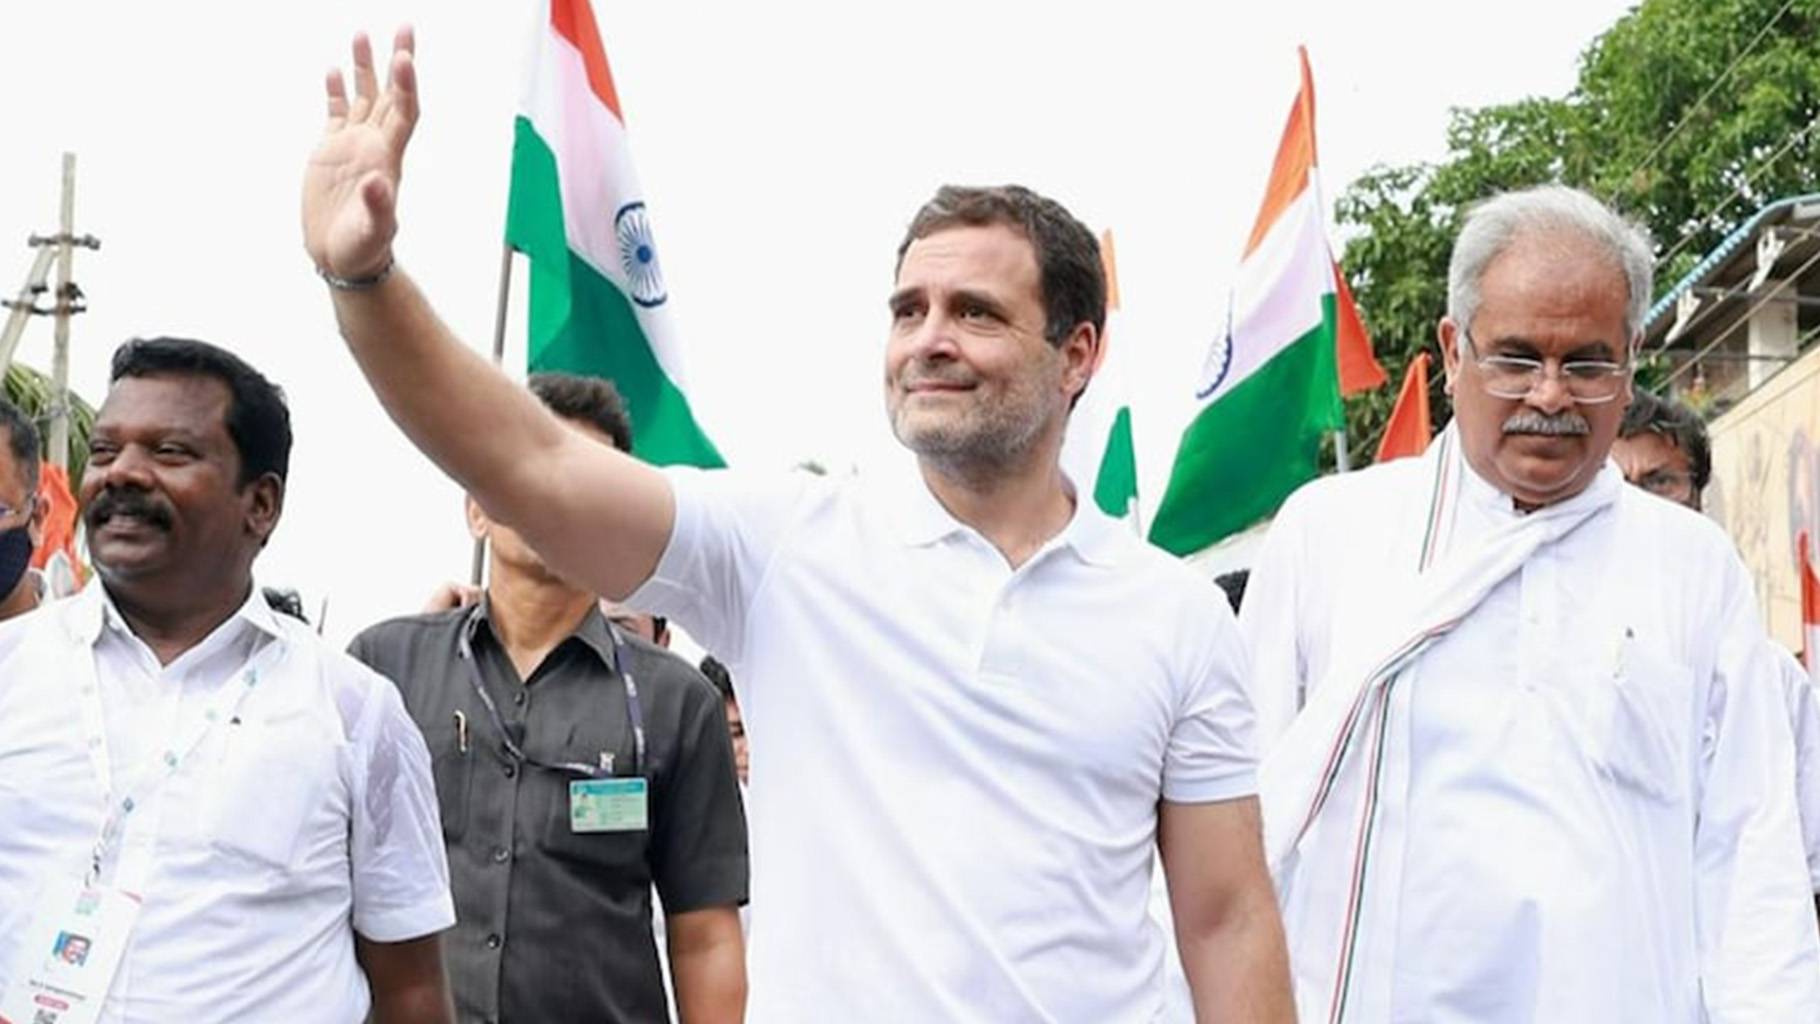 Huge crowd gathered in Rahul Gandhi's visit, but controversial statements also happened...